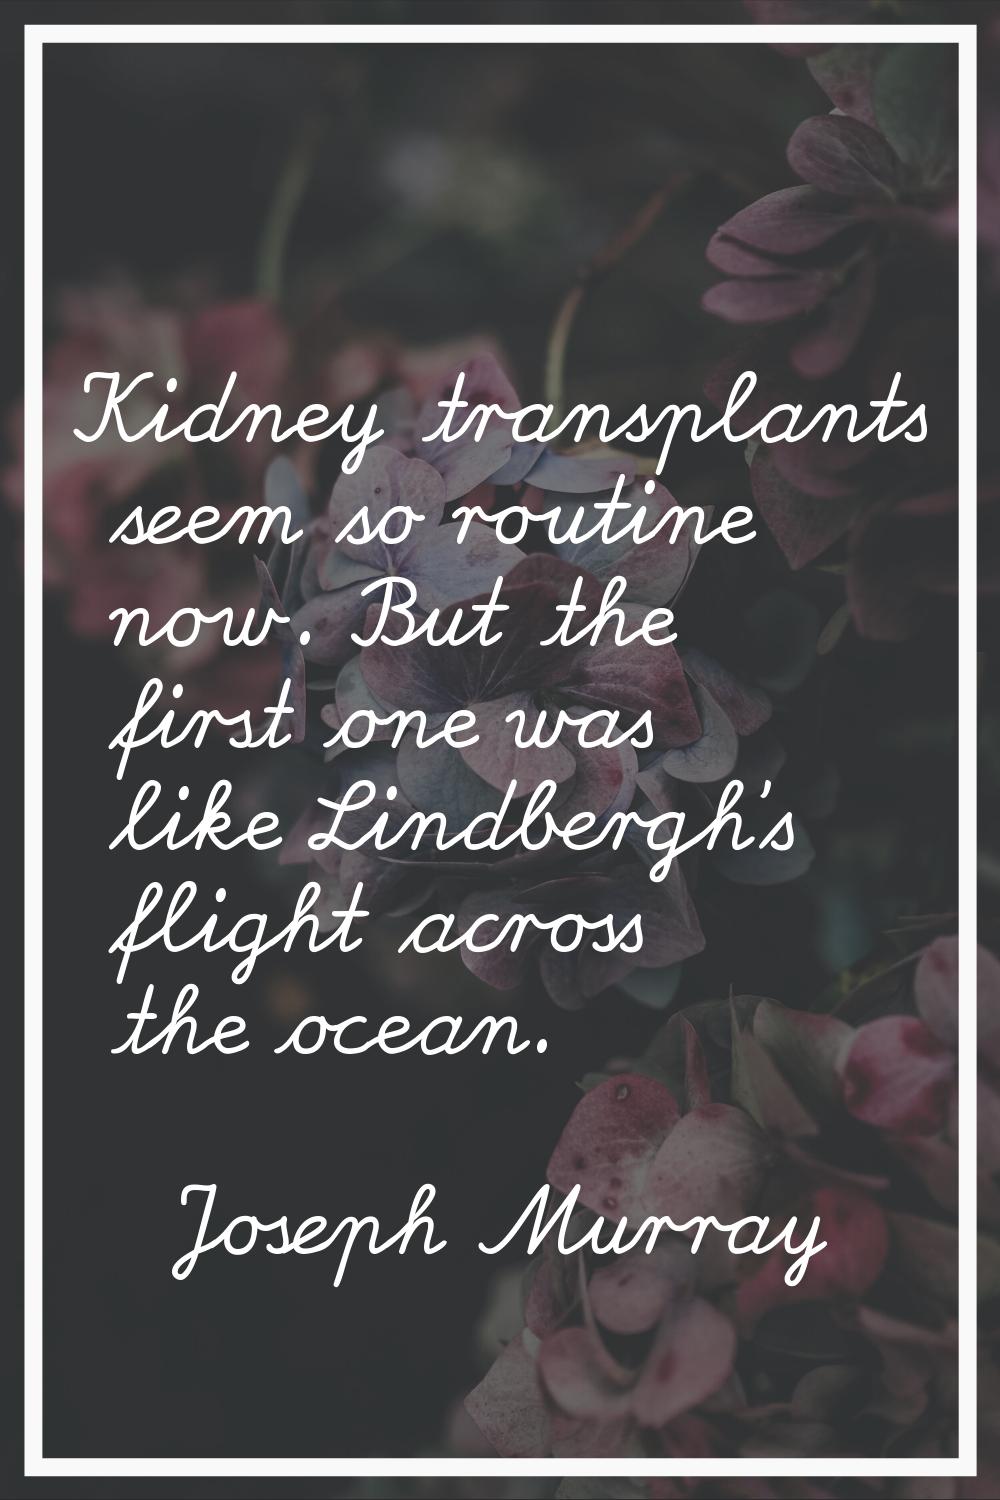 Kidney transplants seem so routine now. But the first one was like Lindbergh's flight across the oc